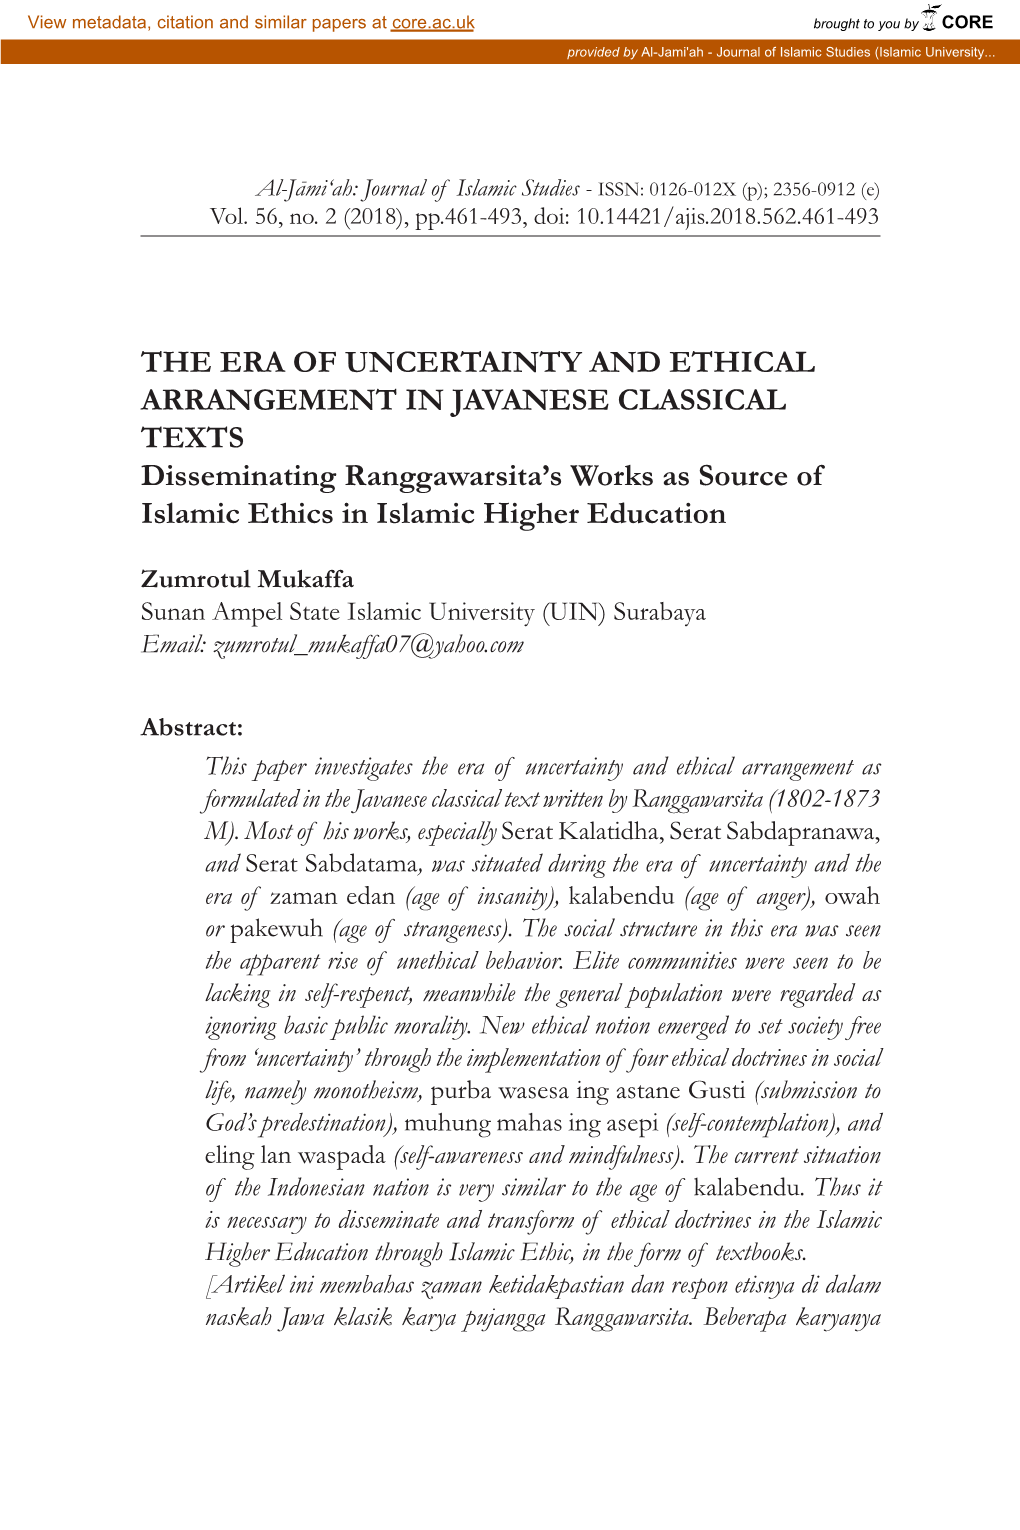 The Era of Uncertainty and Ethical Arrangement